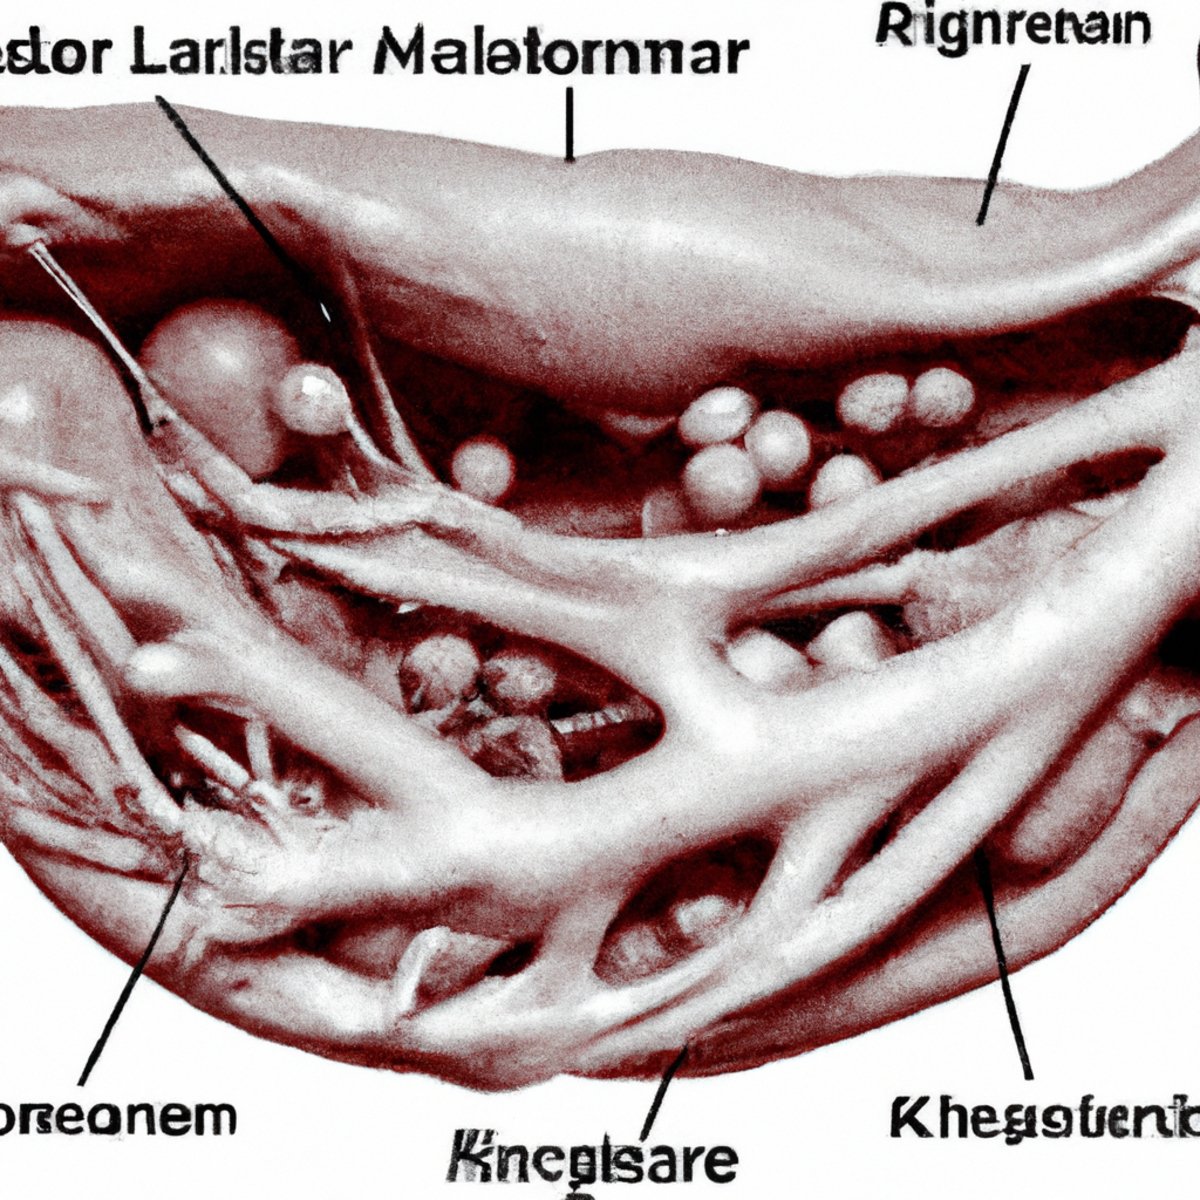 Close-up of human abdomen with swollen, twisted gallbladder surrounded by liver, stomach, and intestines. Abnormality of gallbladder volvulus emphasized.